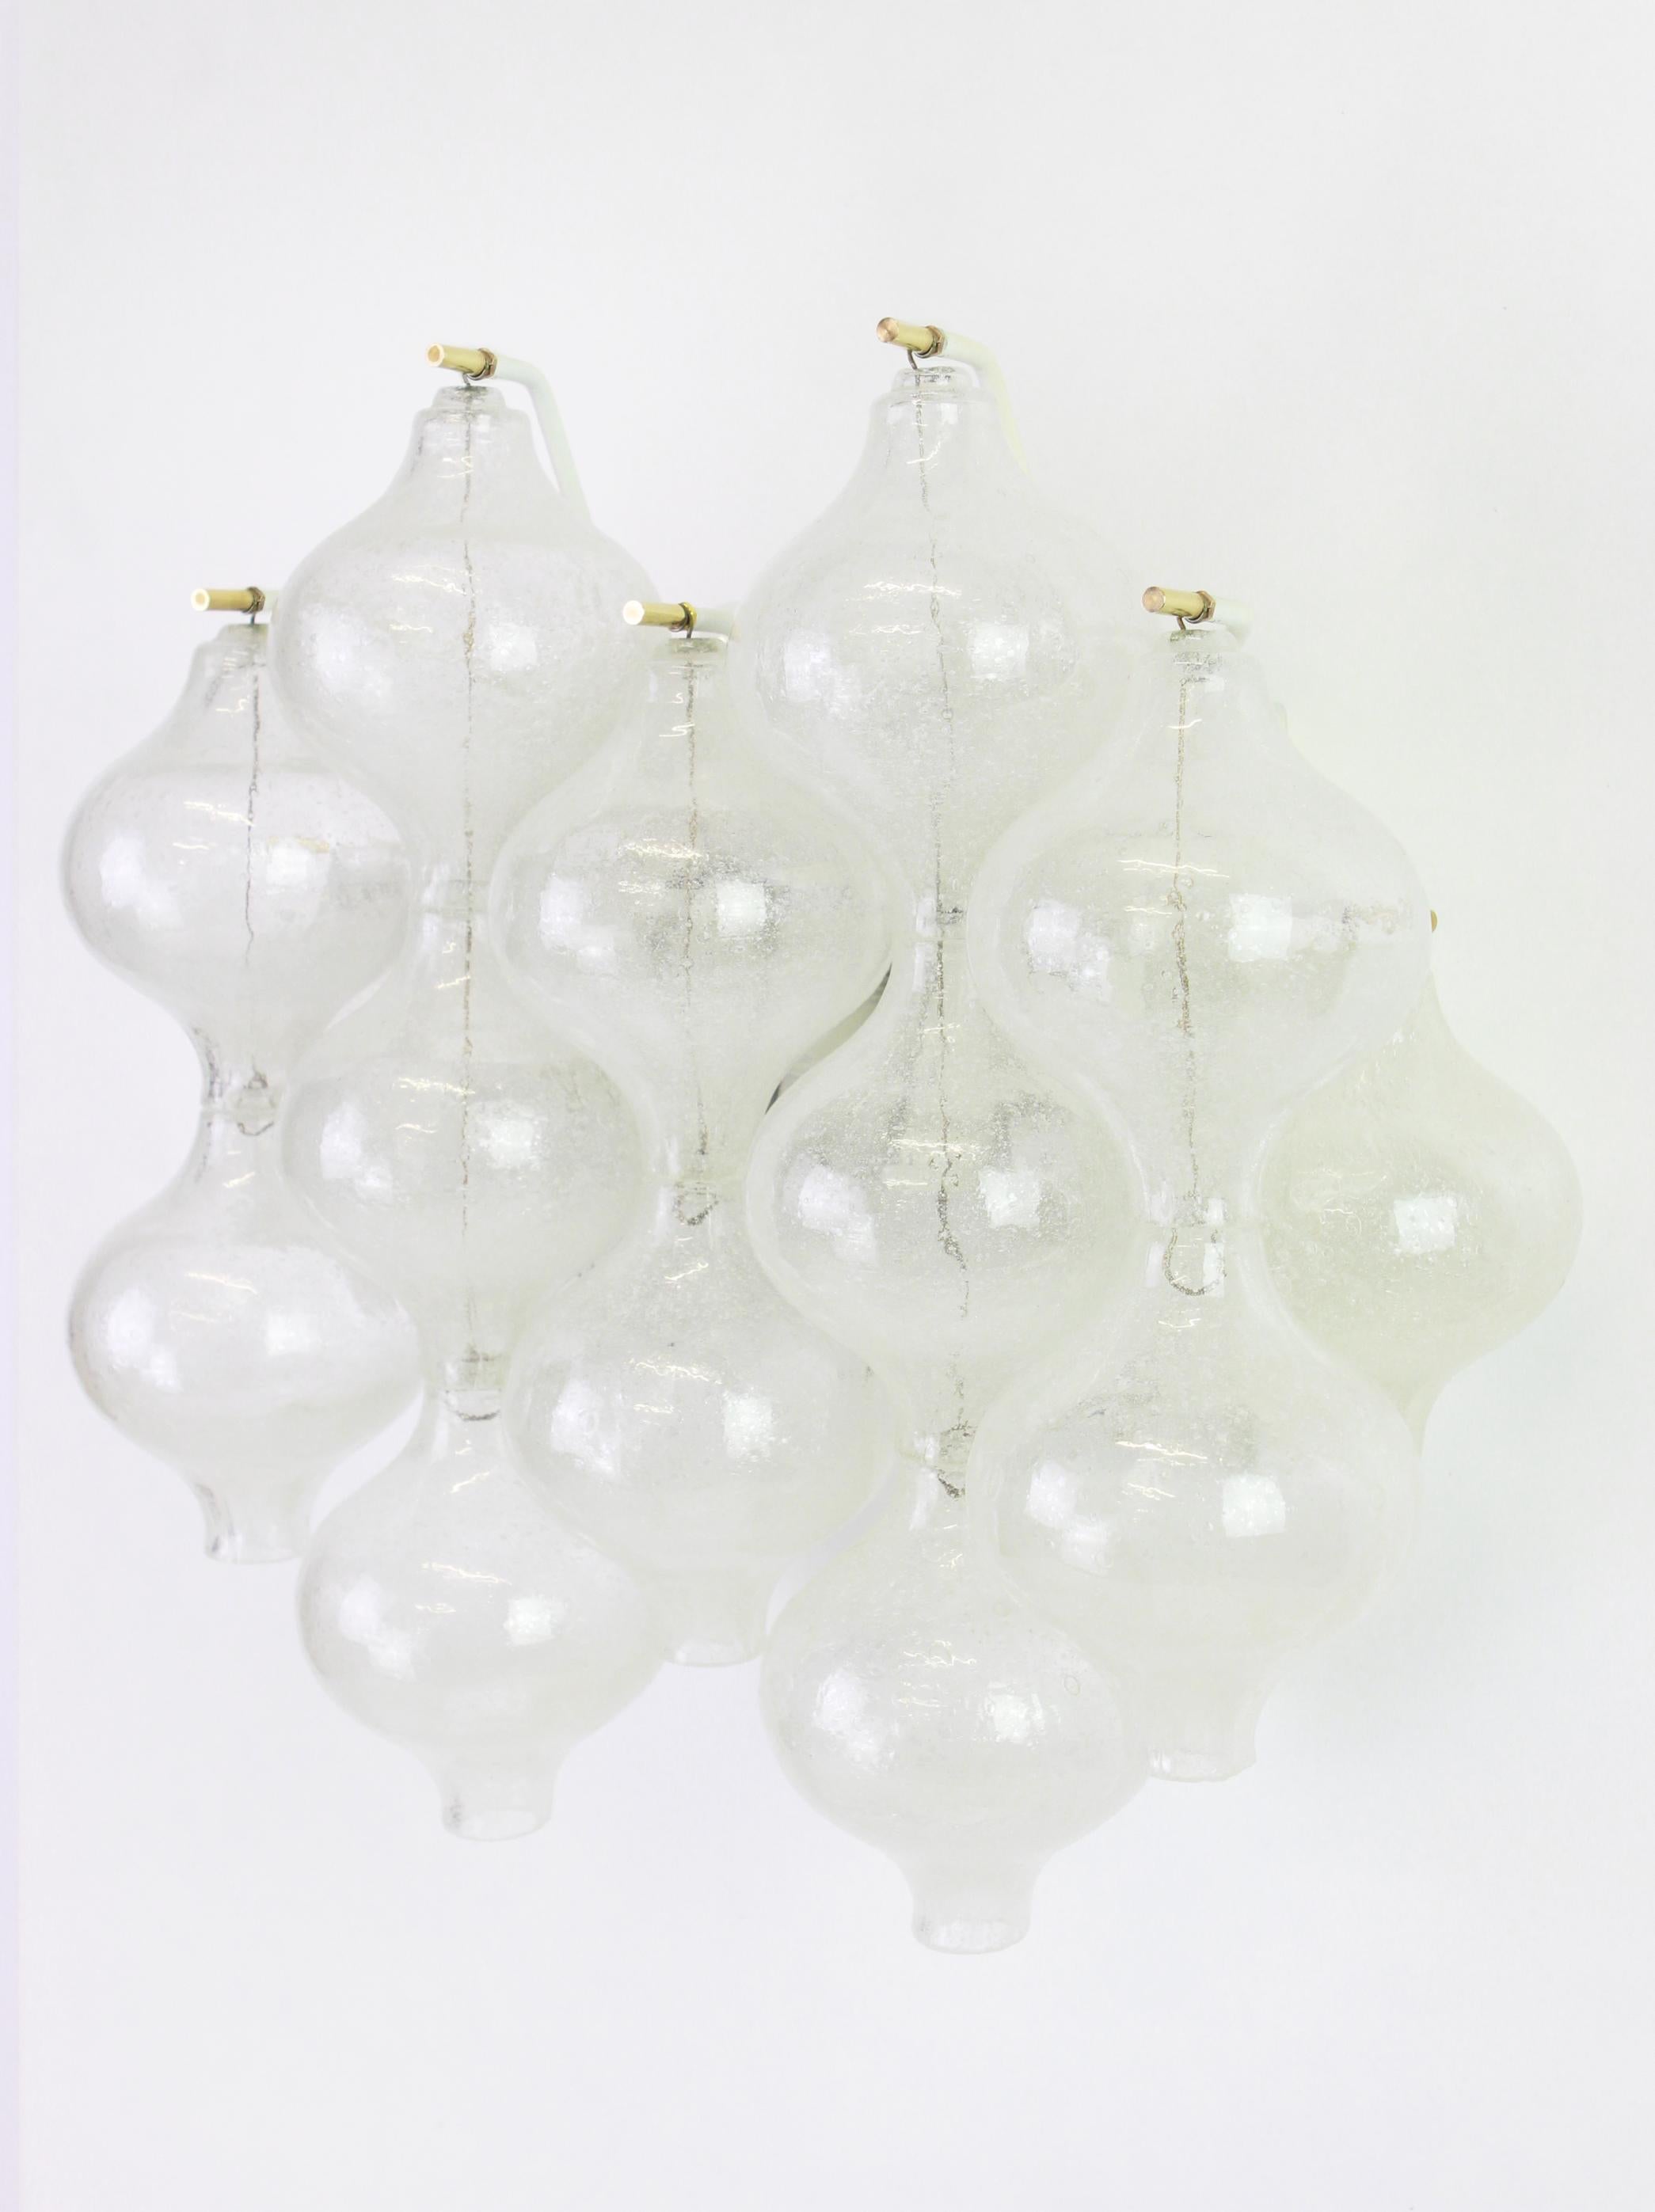 1 of 4 Pairs of Large Kalmar 'Tulipan' Sconces Wall Lights, Austria, 1970s For Sale 8